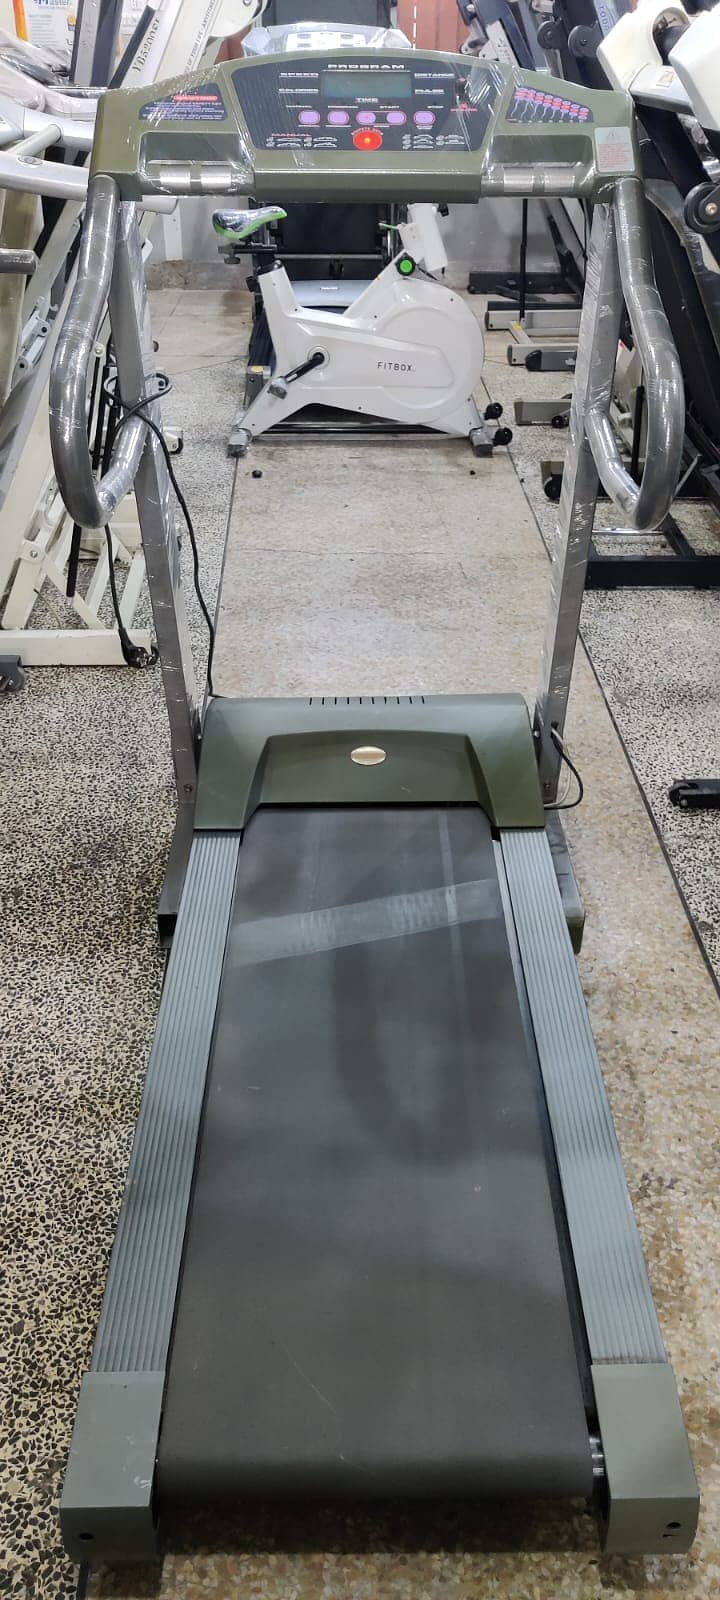 Treadmill Cycle Elliptical Running Machine Cardio Home & Commercial KW 6